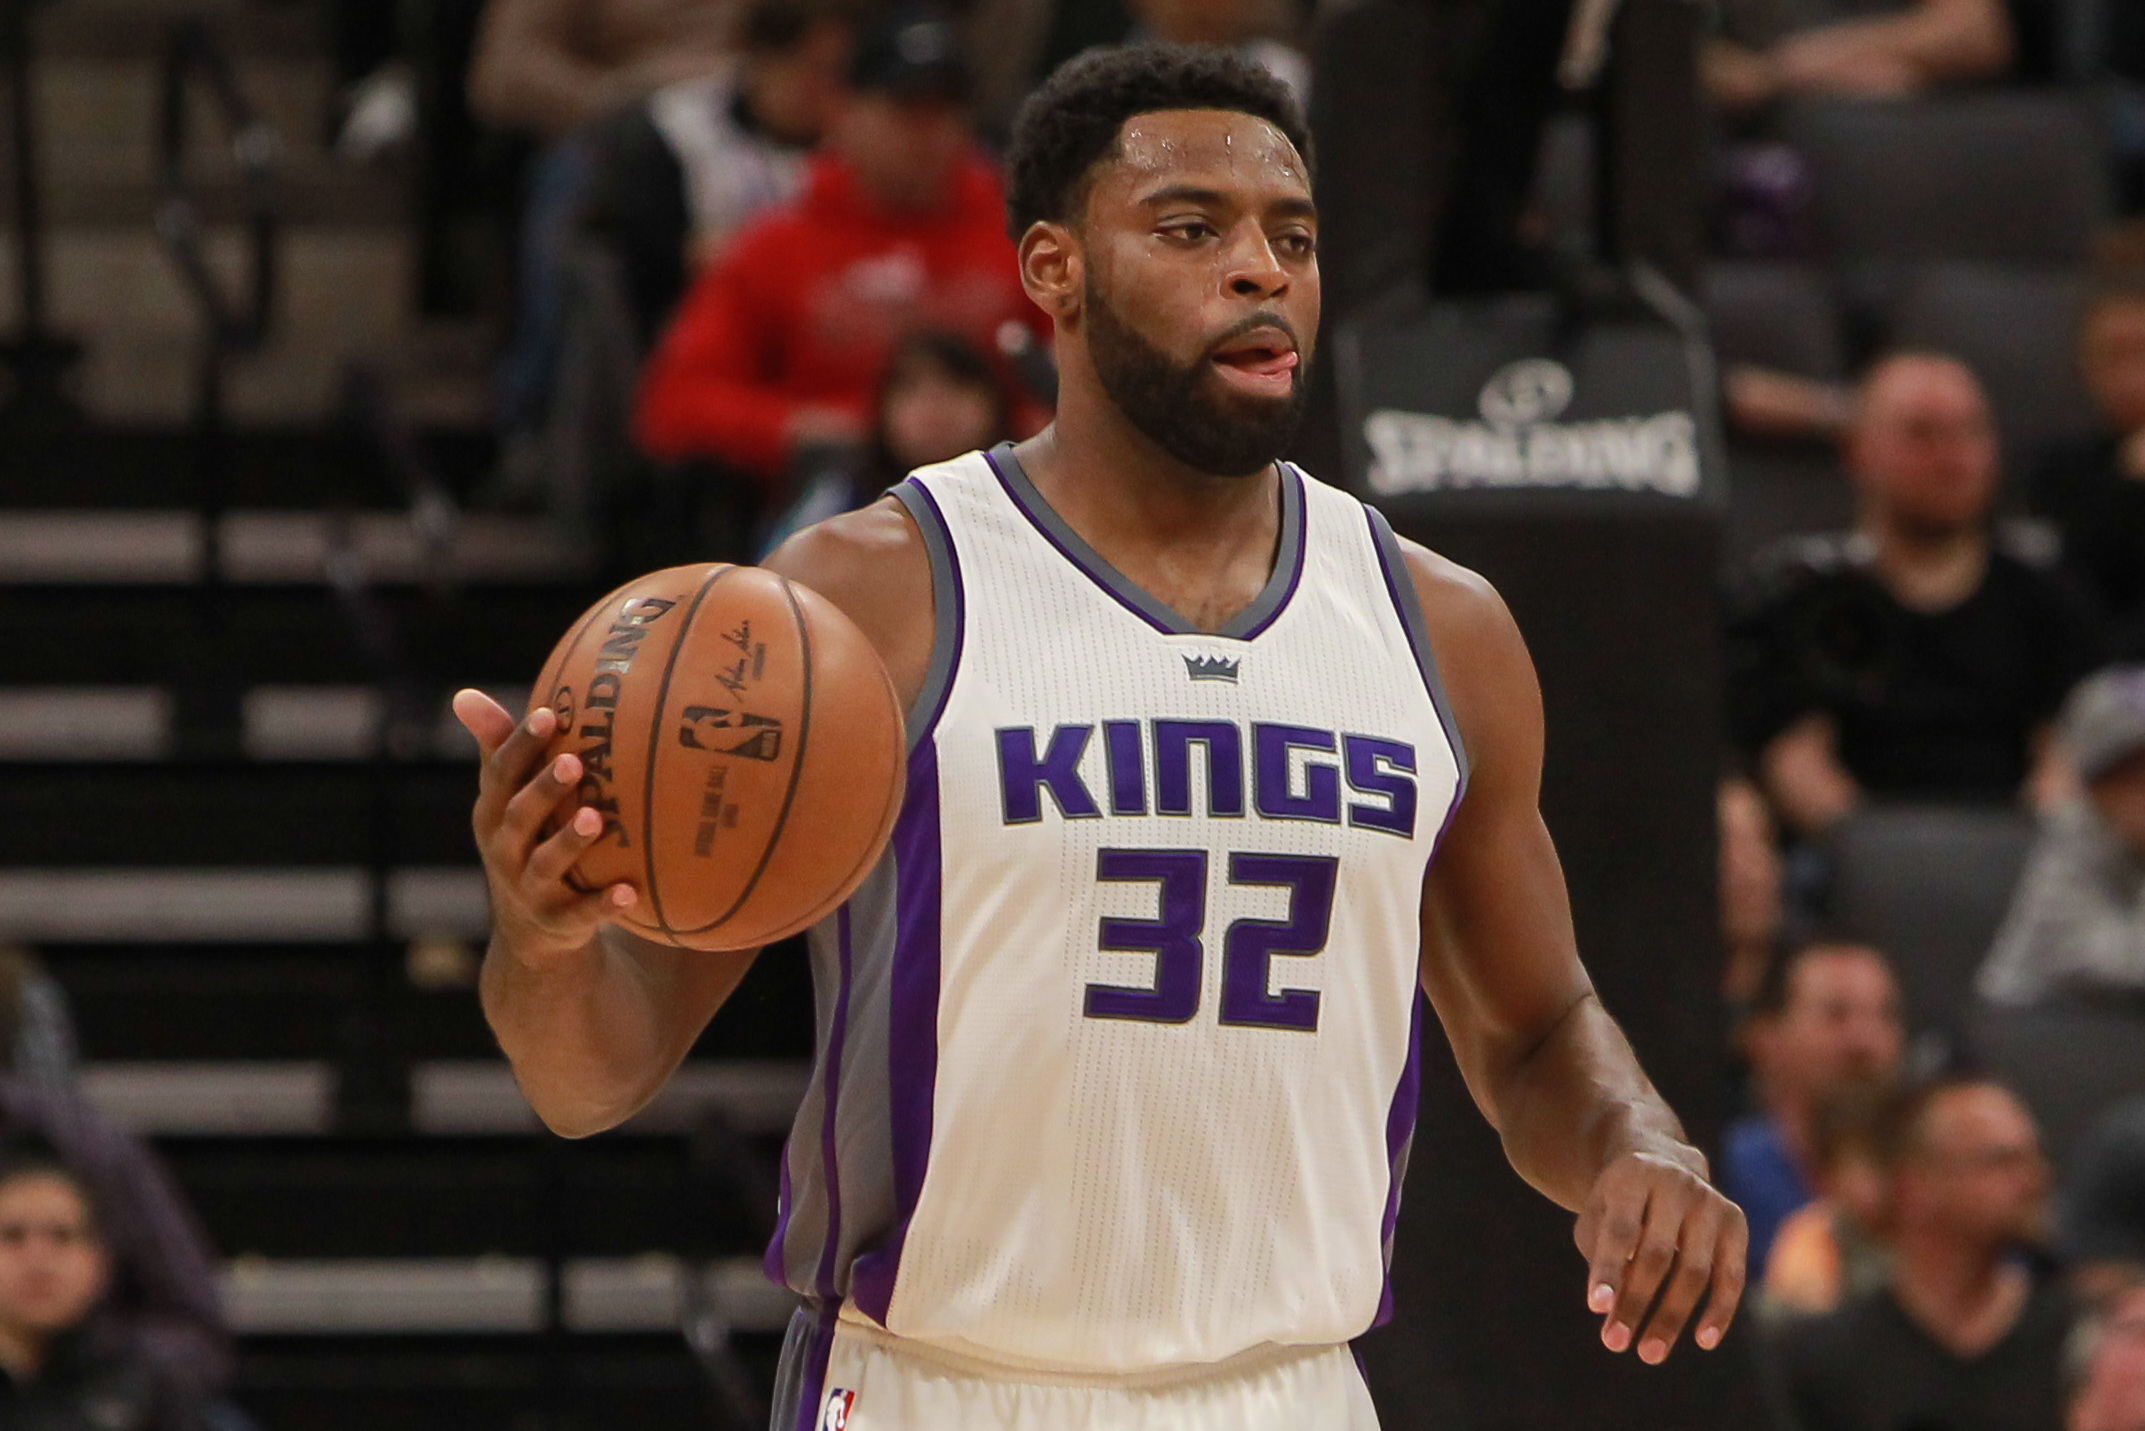 Bleacher Report on X: Tyreke Evans has been reinstated by the NBA